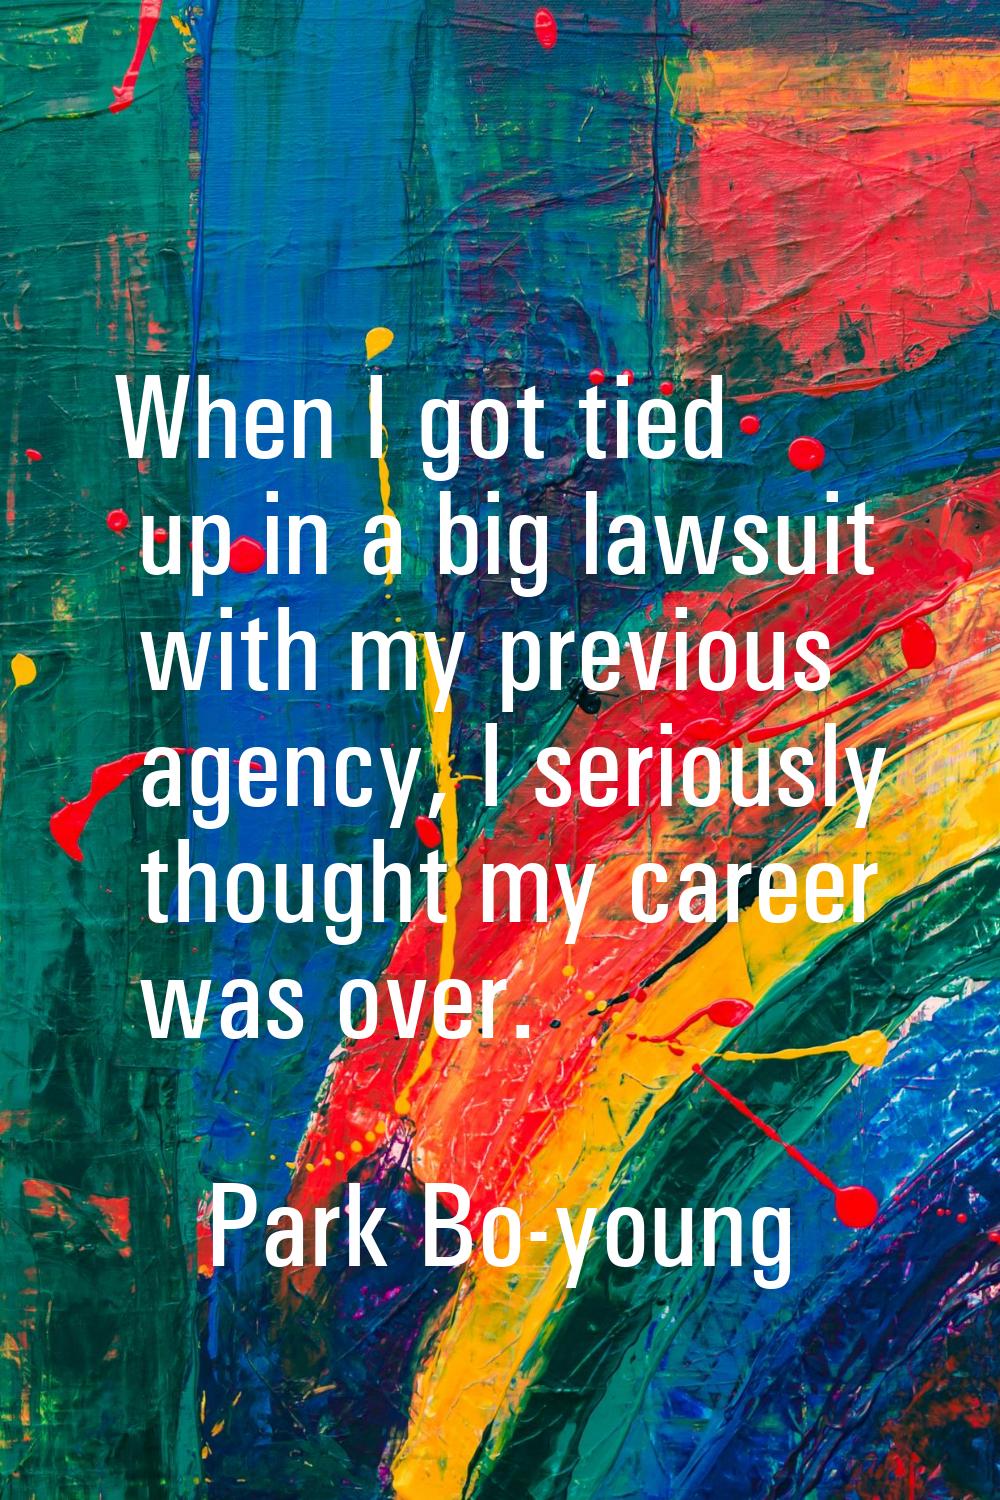 When I got tied up in a big lawsuit with my previous agency, I seriously thought my career was over